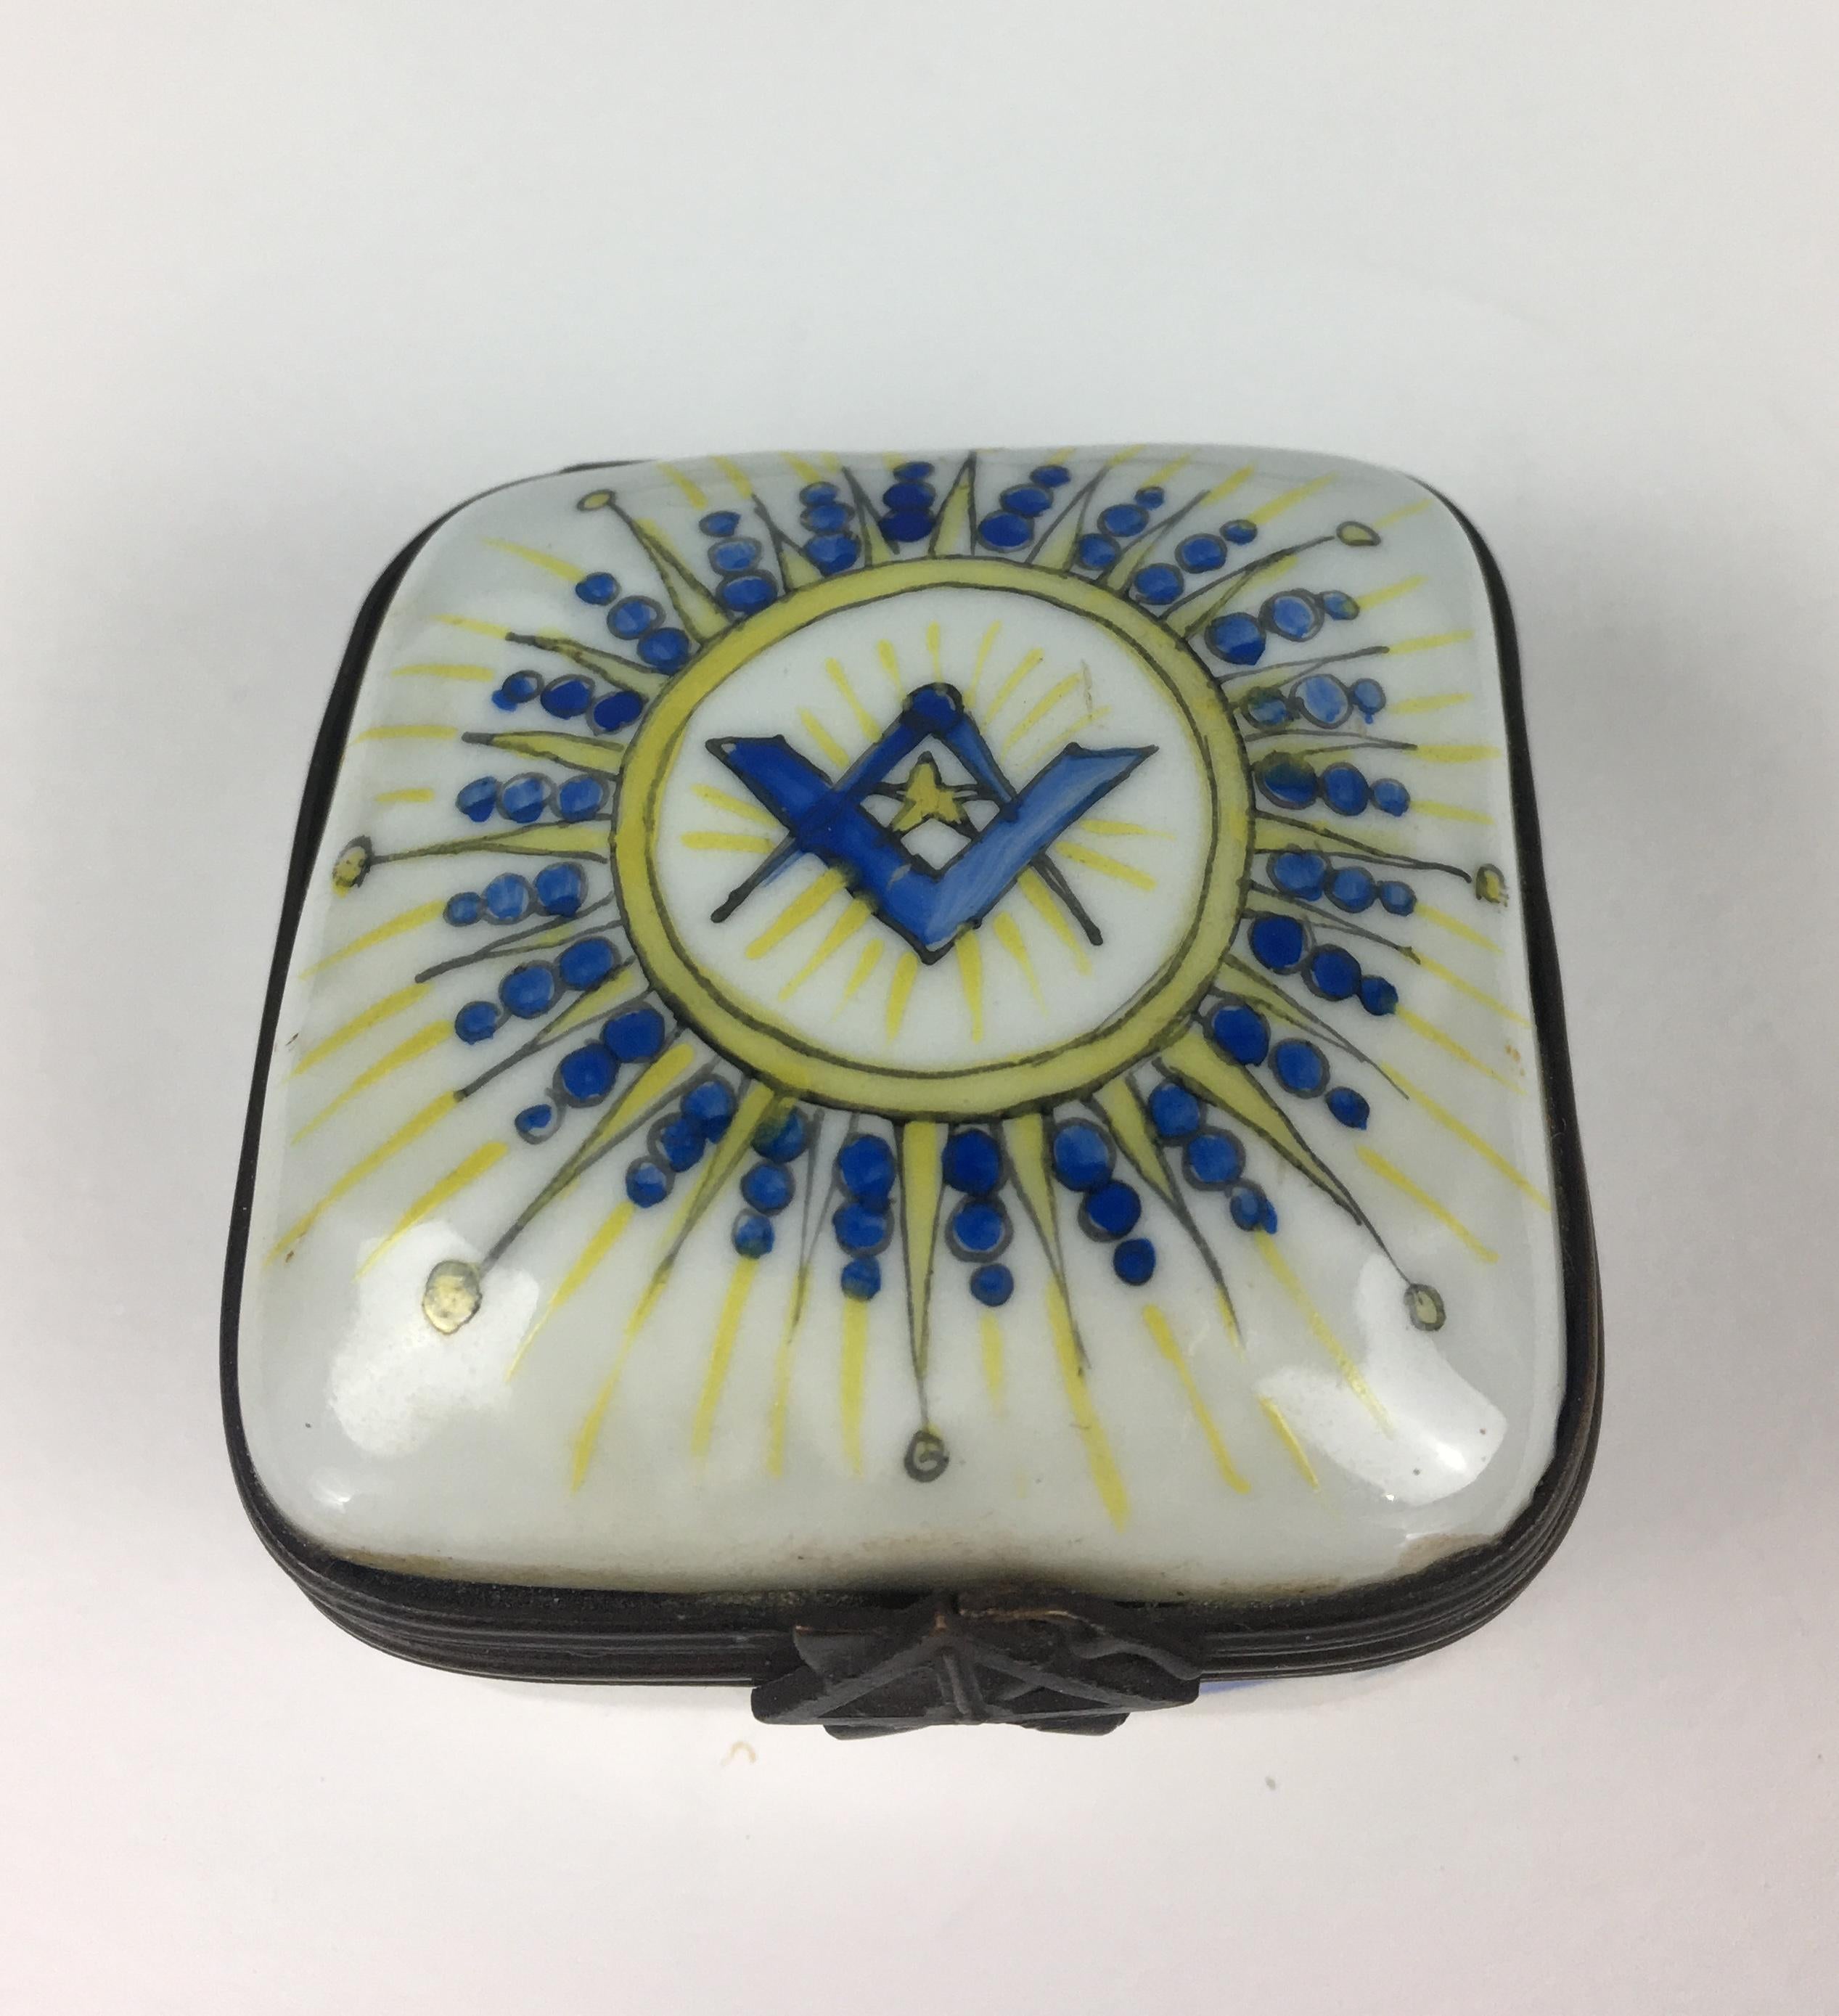 French Set of 9 Masonic 19th Century Decorative Boxes by Limoges Porcelain, France